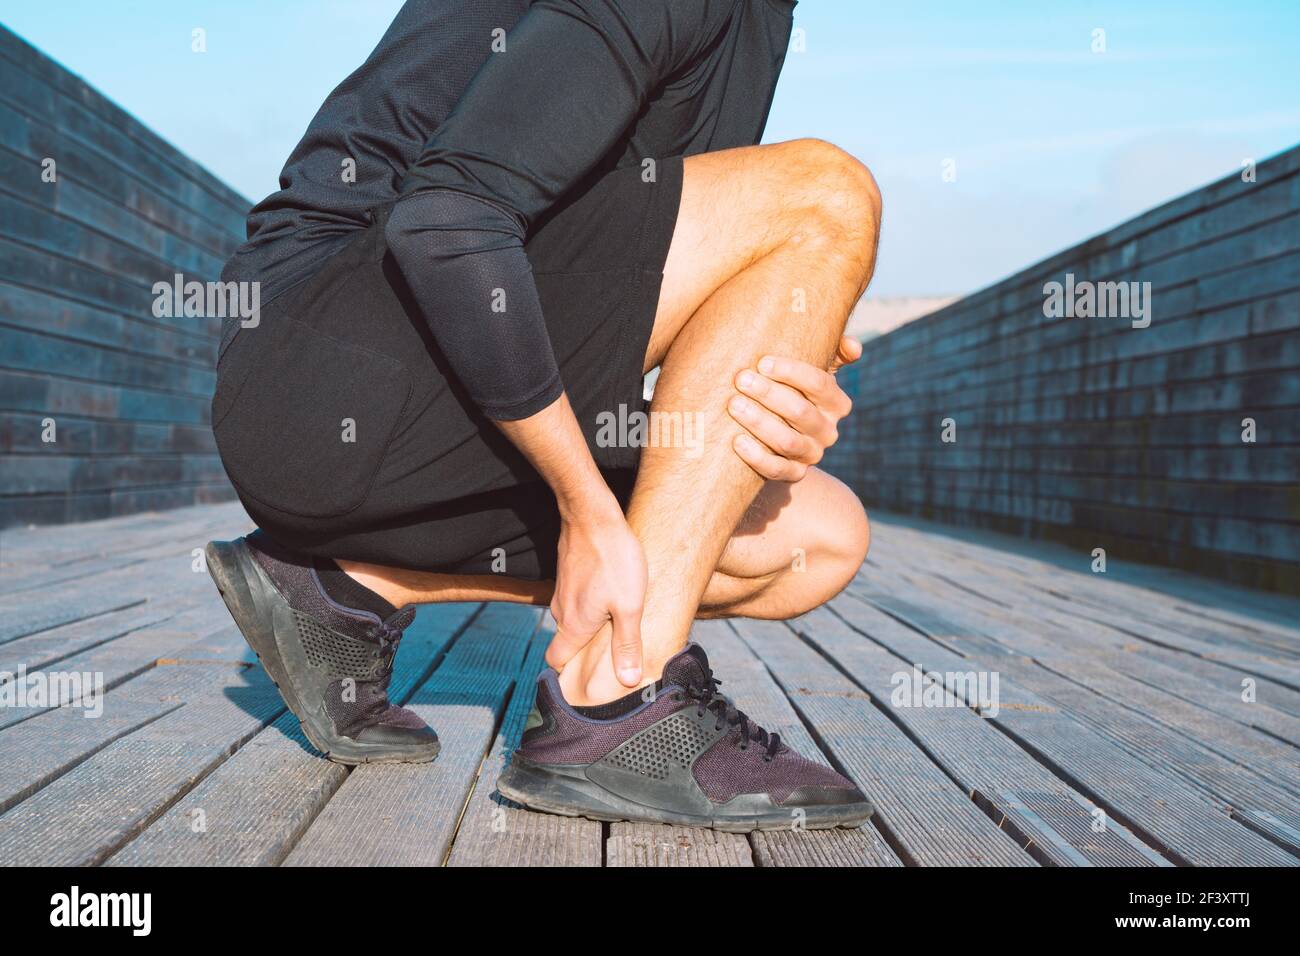 Running injuries. Runner suffering from ankle pain or achilles injury. Ankle twist sprain accident Stock Photo